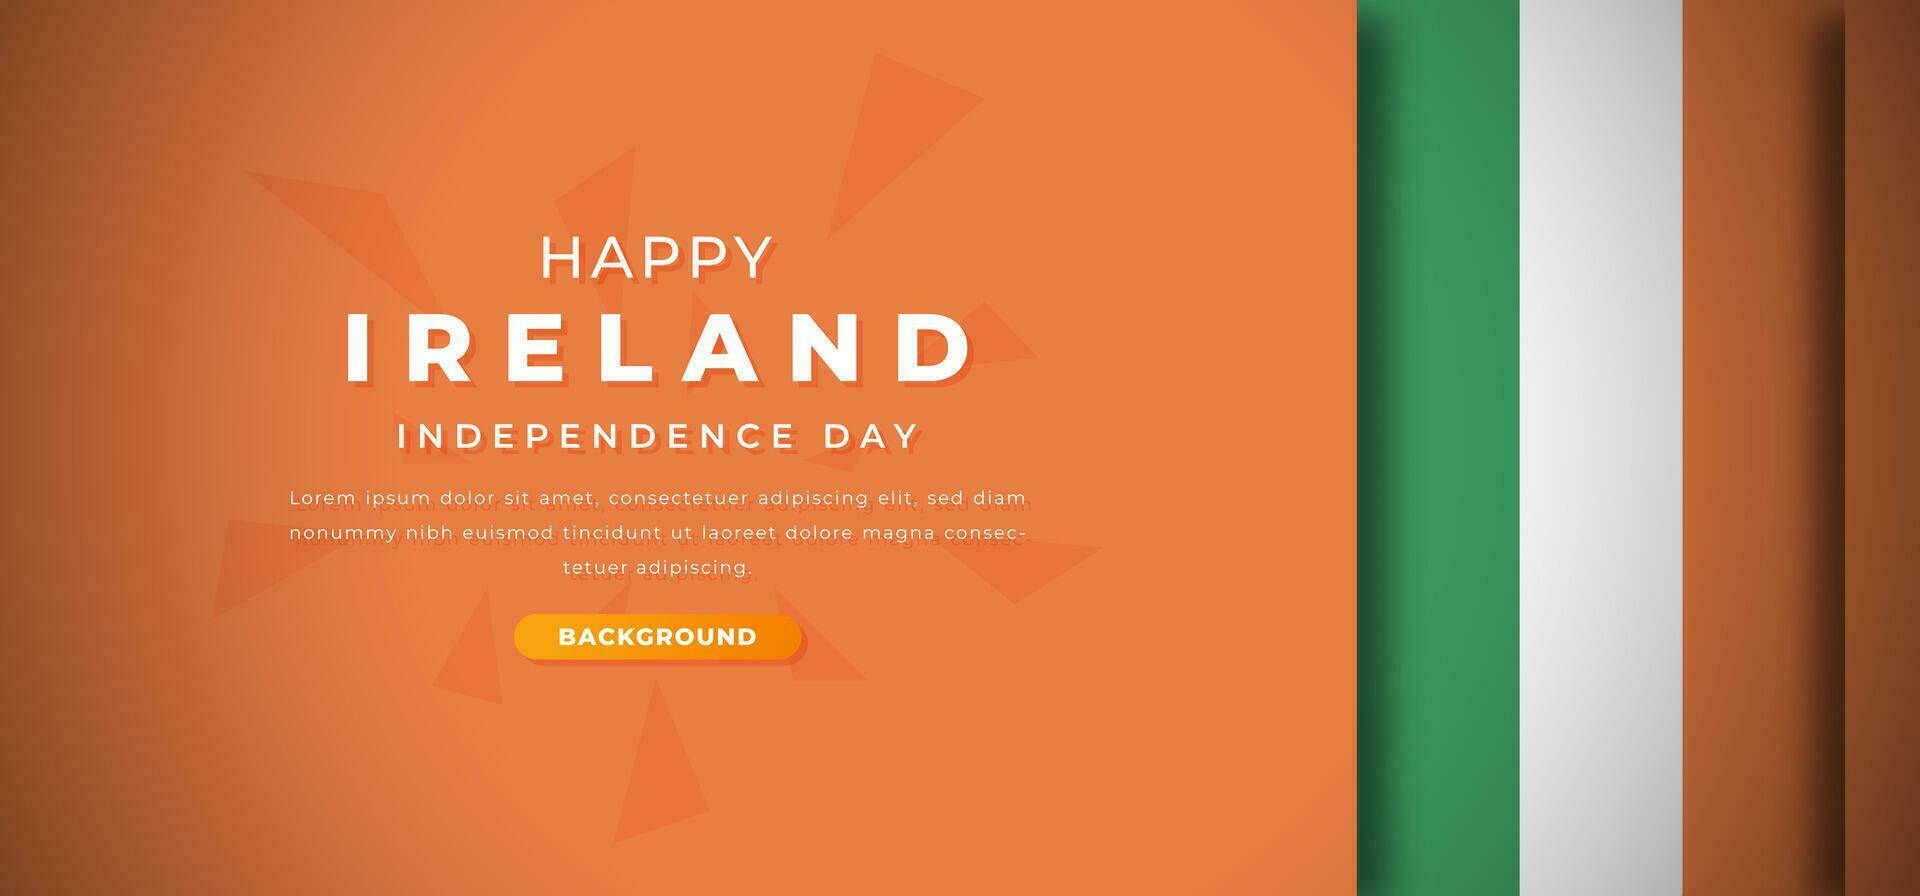 Happy Ireland Independence Day Design Paper Cut Shapes Background Illustration for Poster, Banner, Advertising, Greeting Card vector